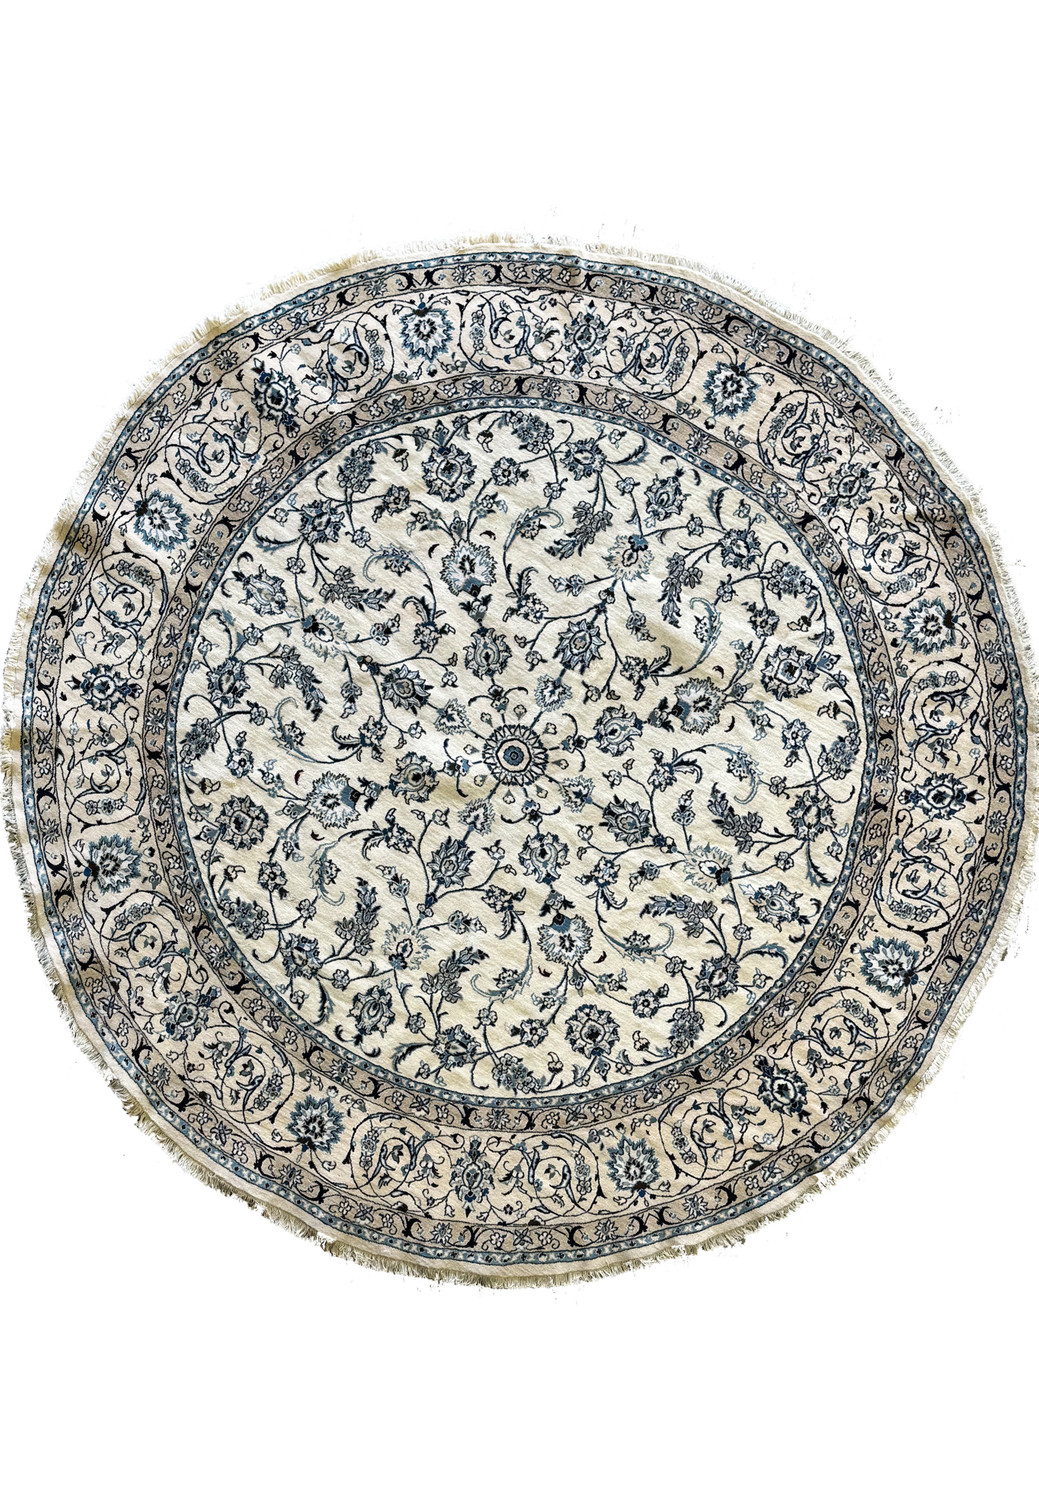 Elegant 9'8 x 9'8 Persian Nain round rug with ivory and navy blue motifs